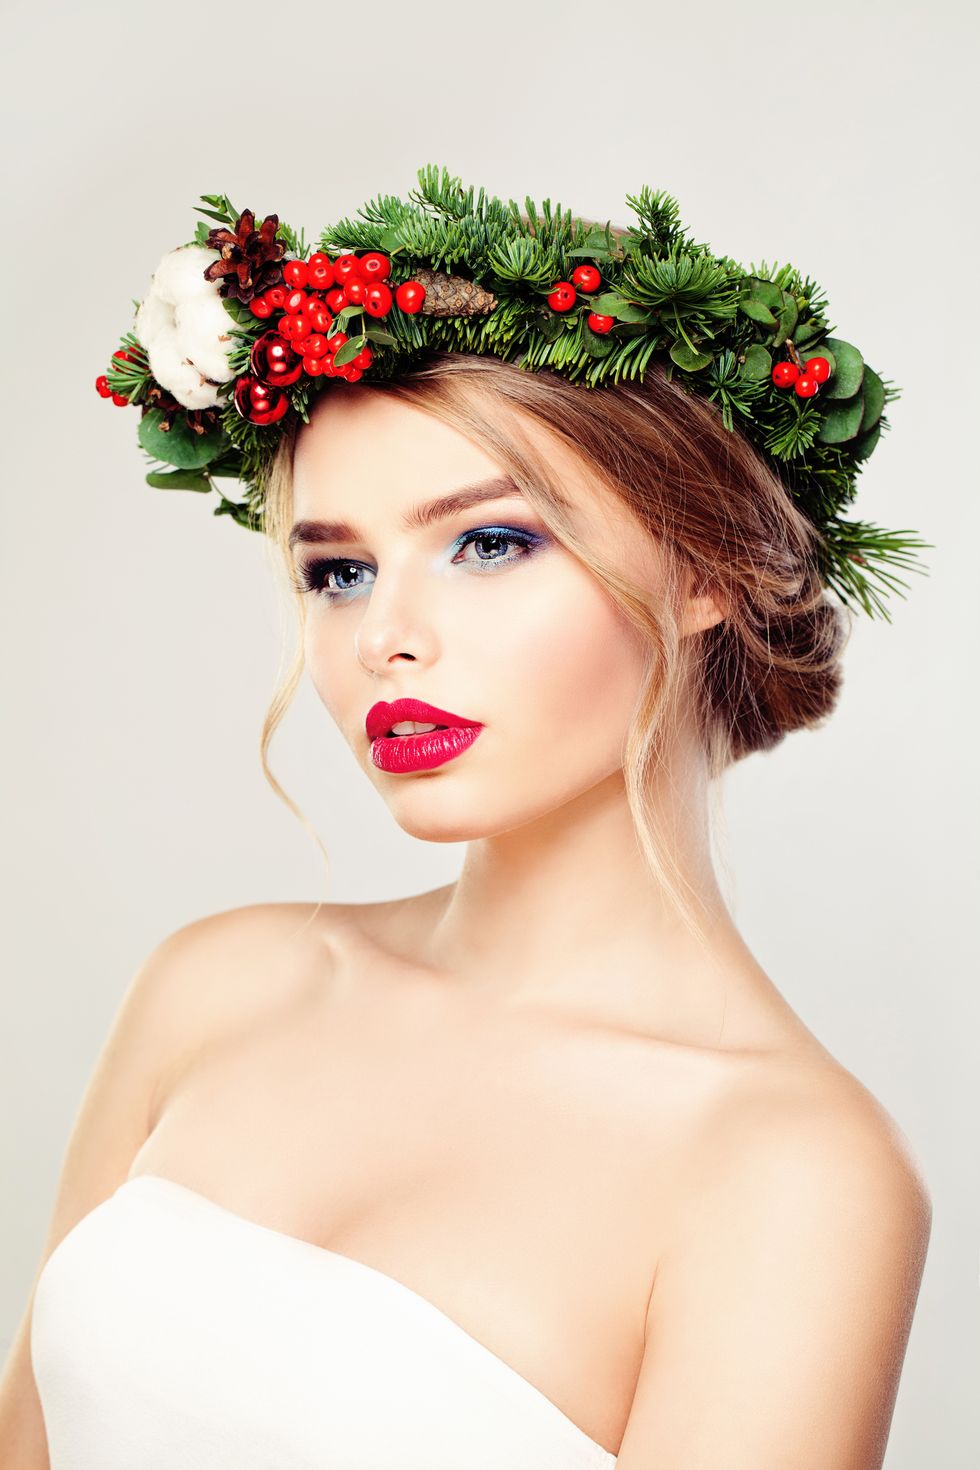 Holiday Hairstyles: 6 Christmas Hairstyles You Need To Try